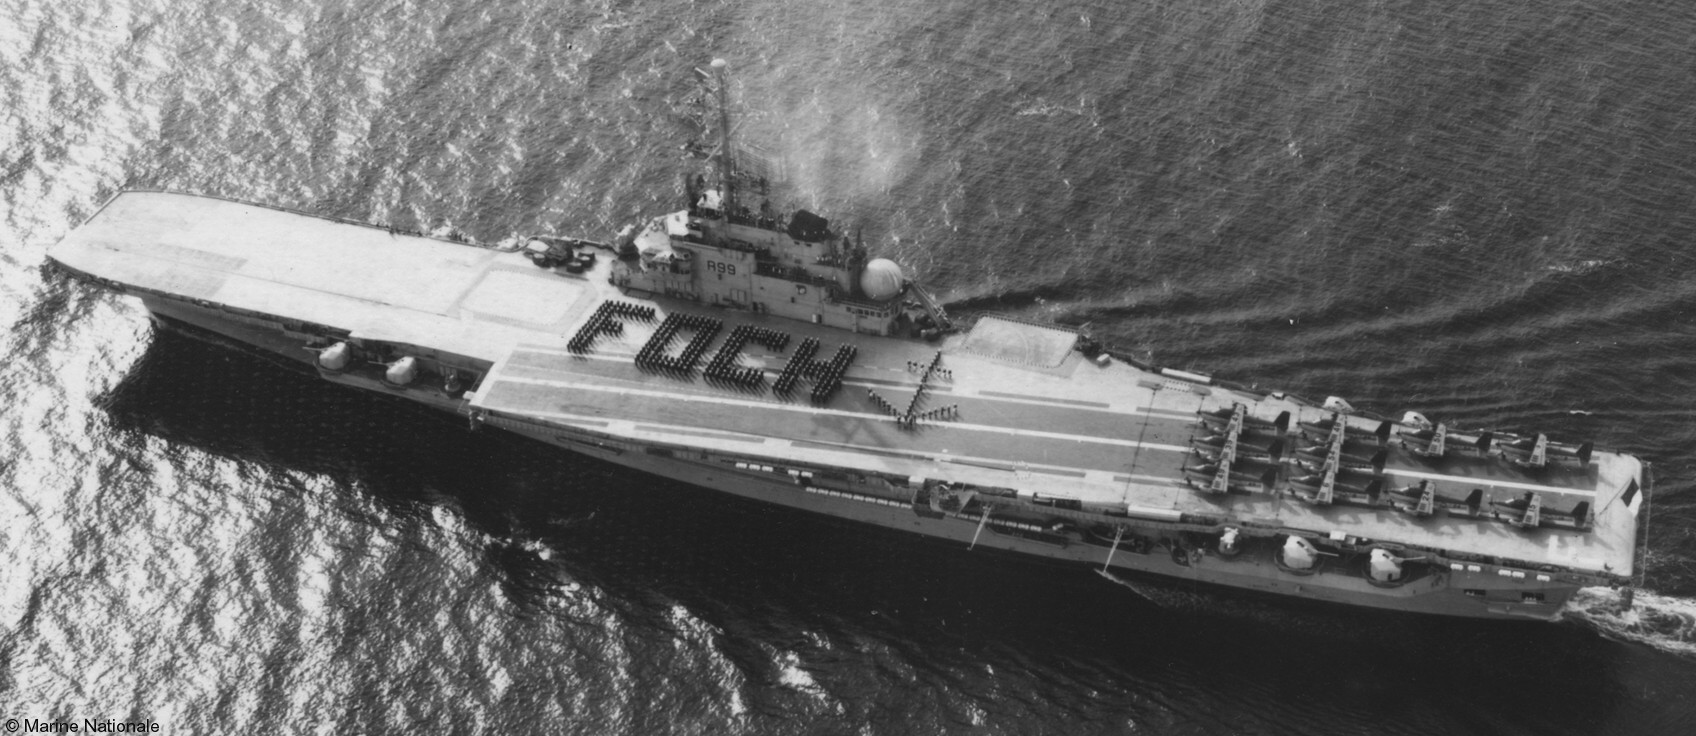 r-99 fs foch aircraft carrier porte-avions french navy marine nationale 18